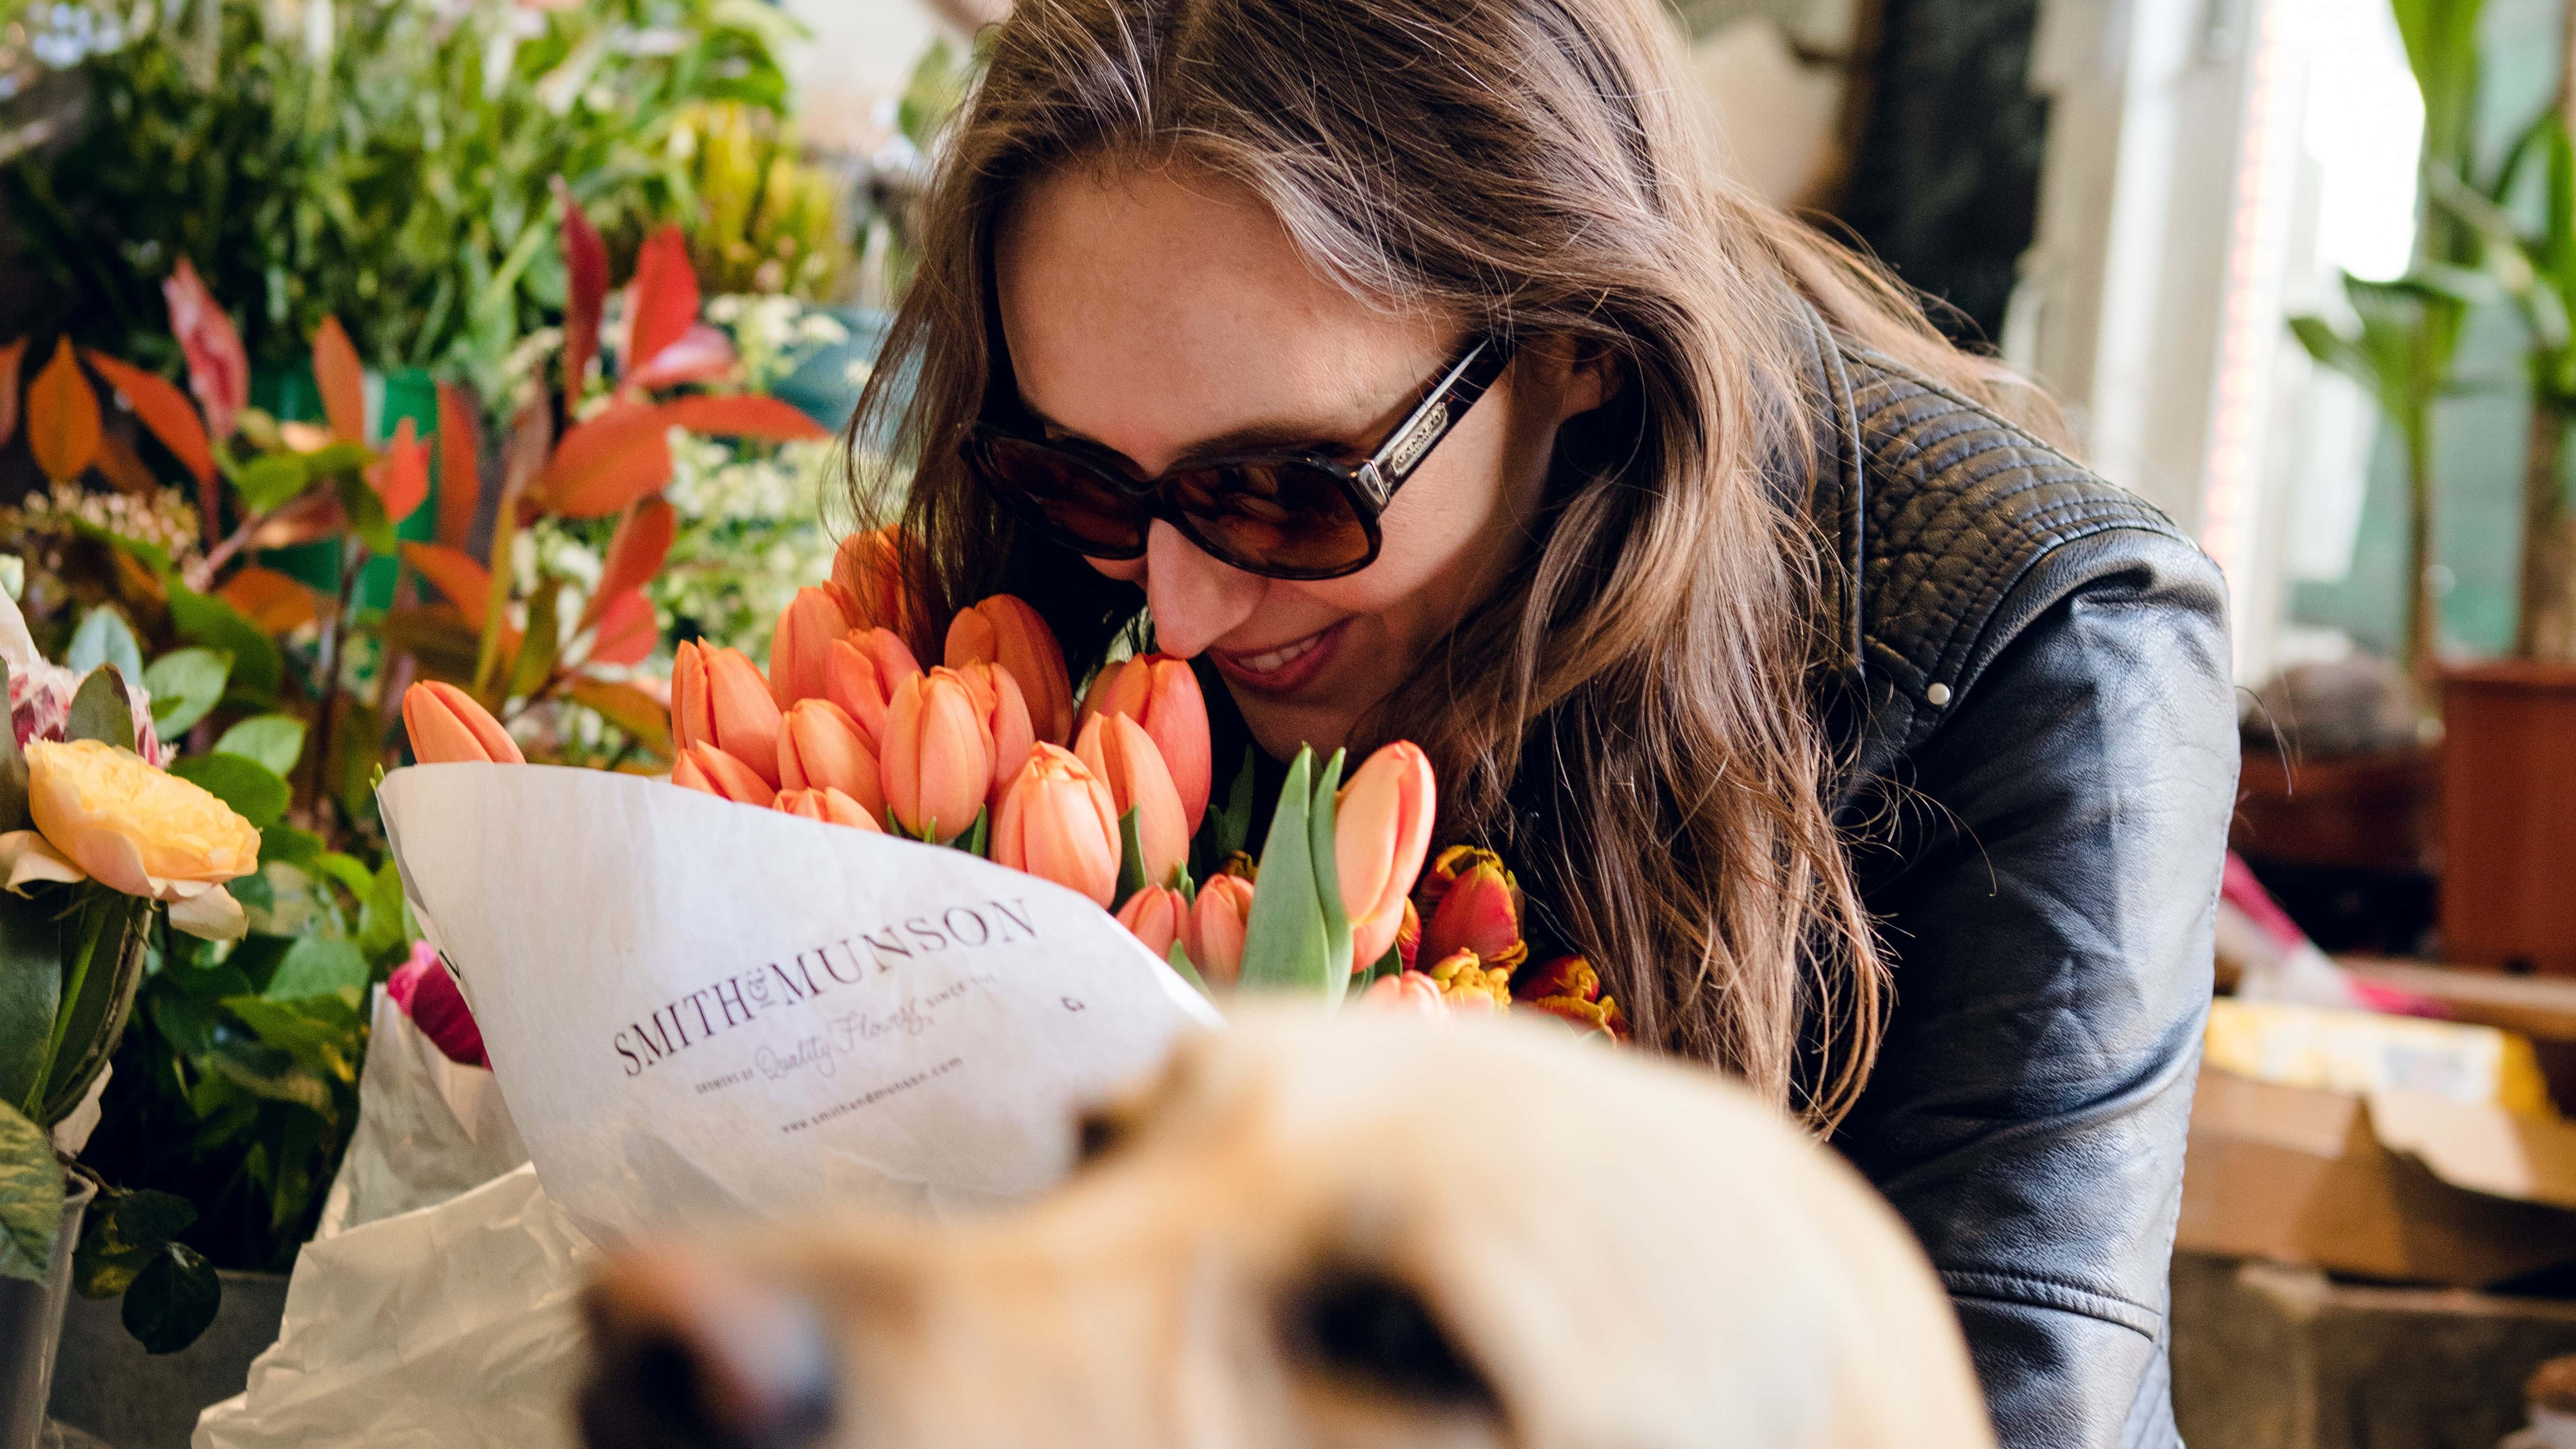 Female guide dog owner with long dark hair and sunglasses sniffs a bouquet of orange tulips, while standing in a flower shop. A yellow Labrador's head is in the foreground, out of focus.